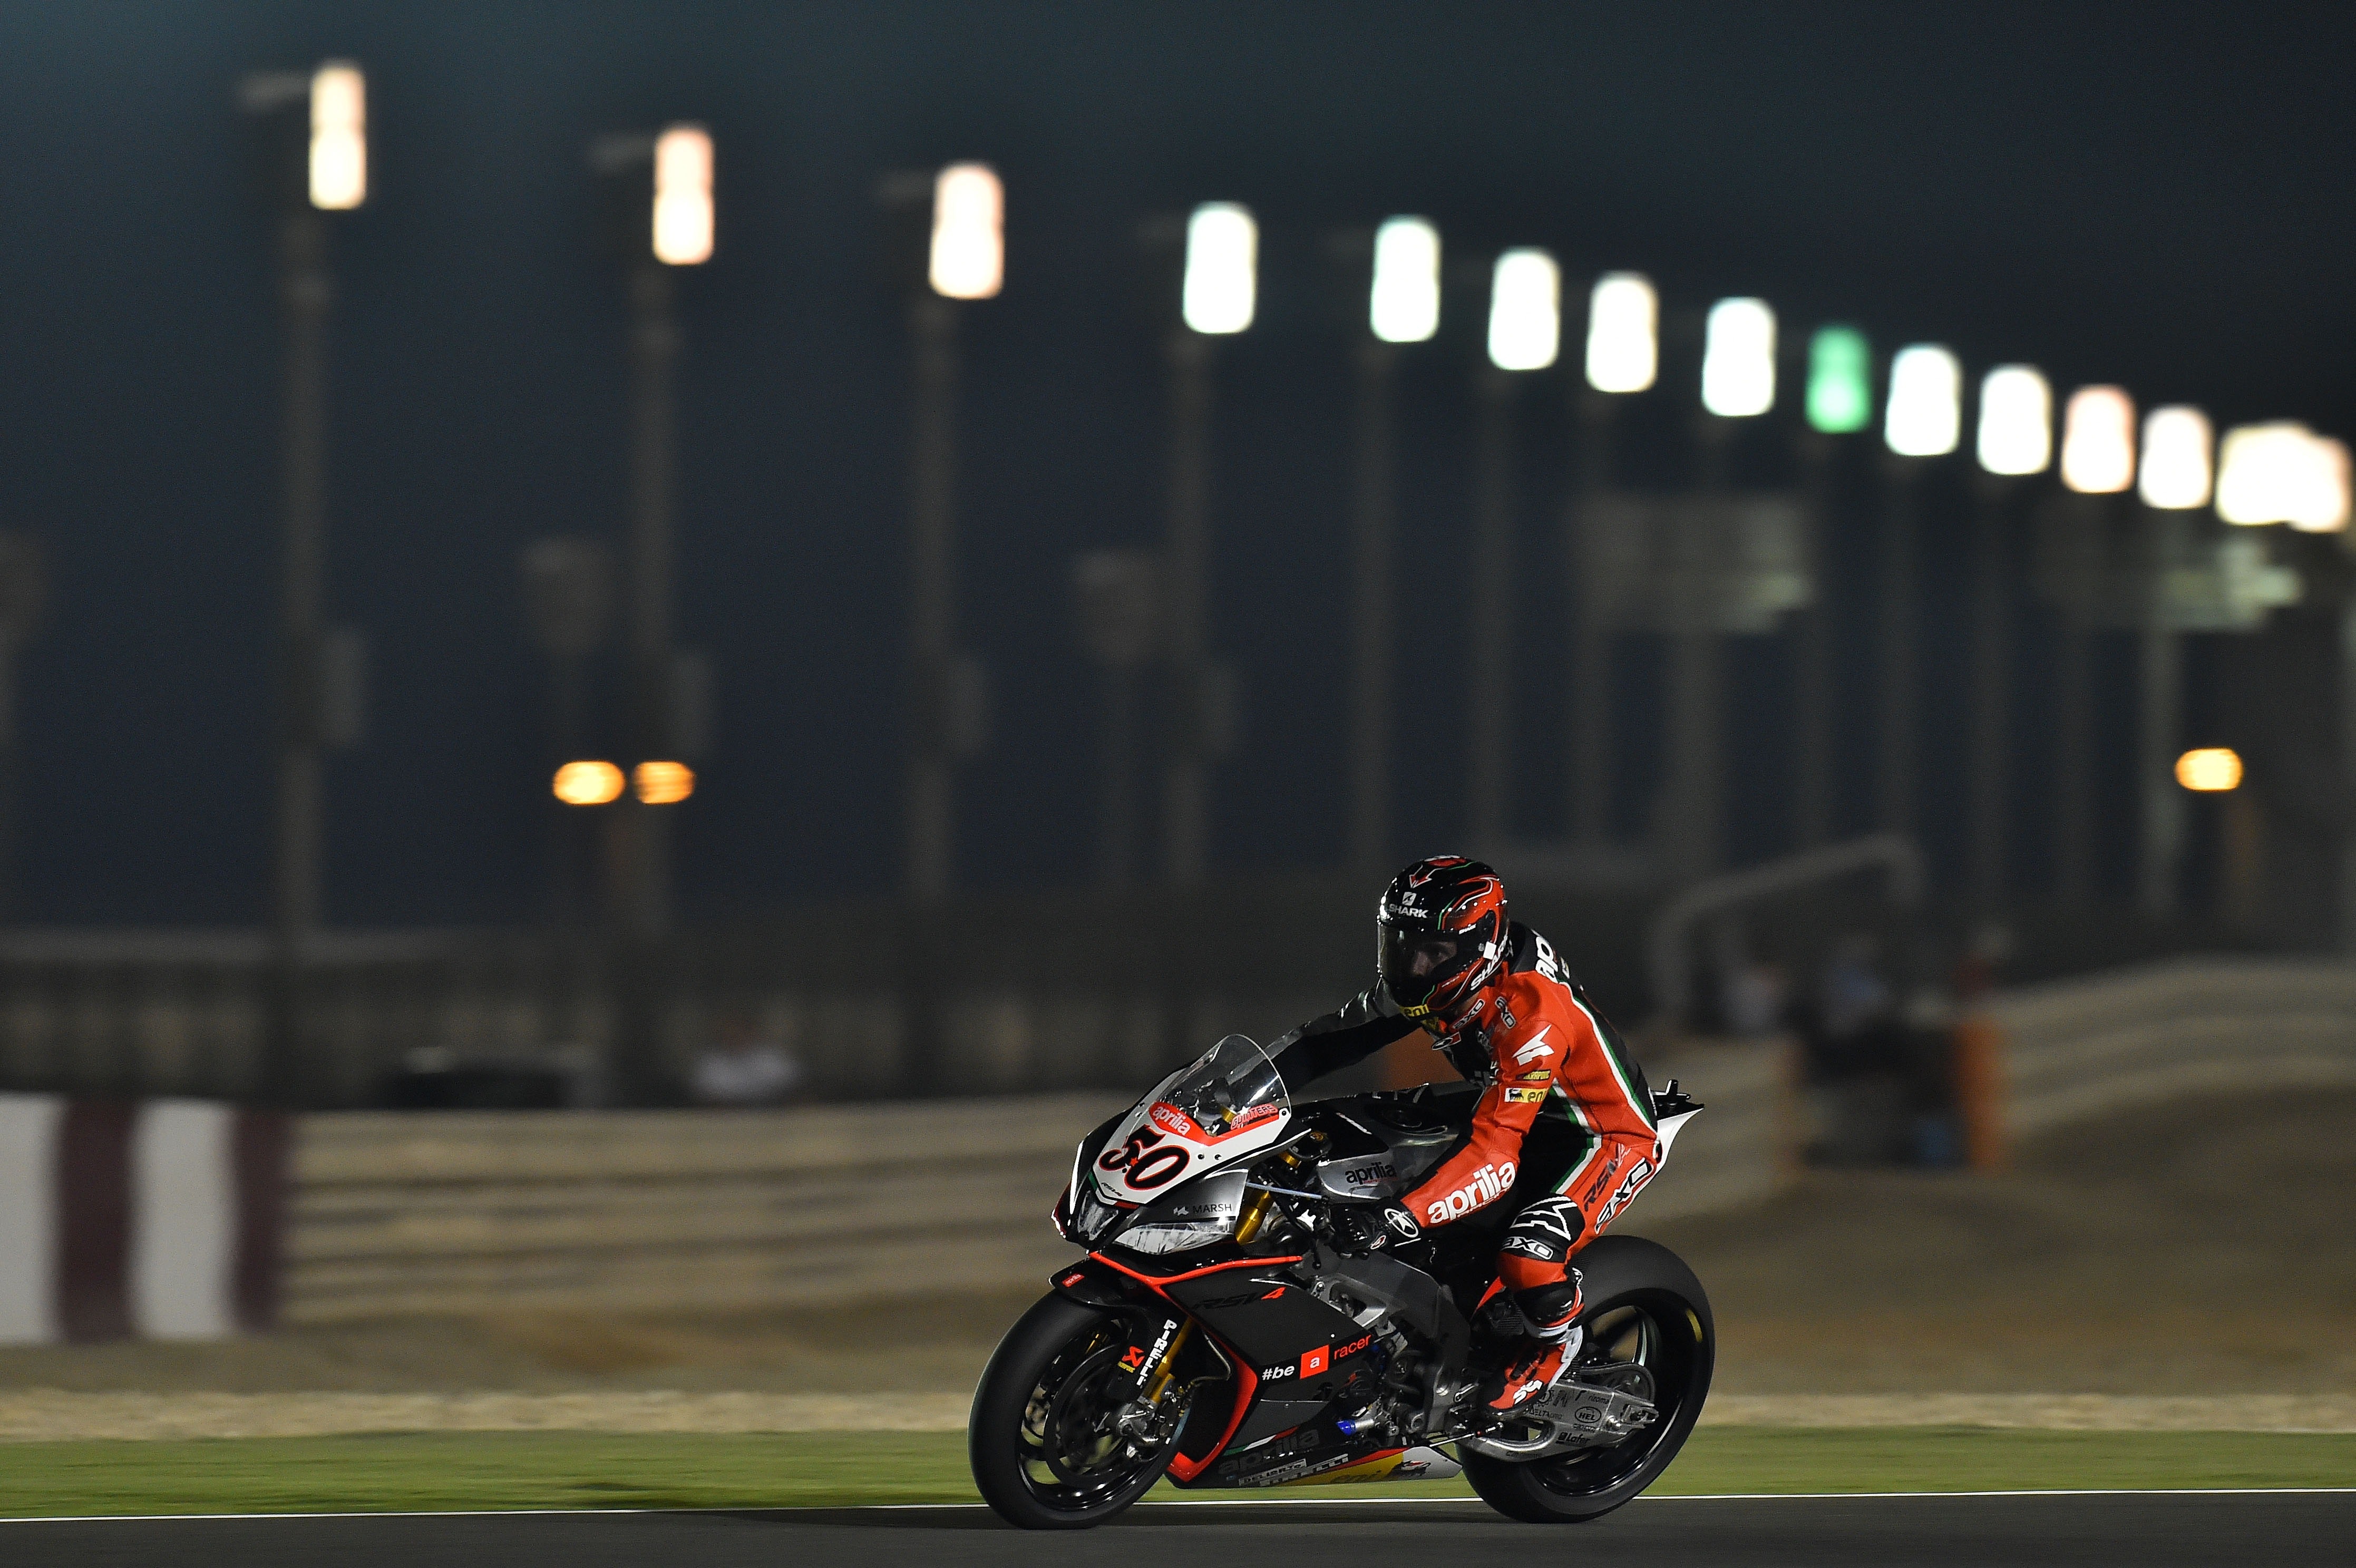 Person Riding Super Bike during Night Race, Action, Night time, Vehicle, Track, HQ Photo